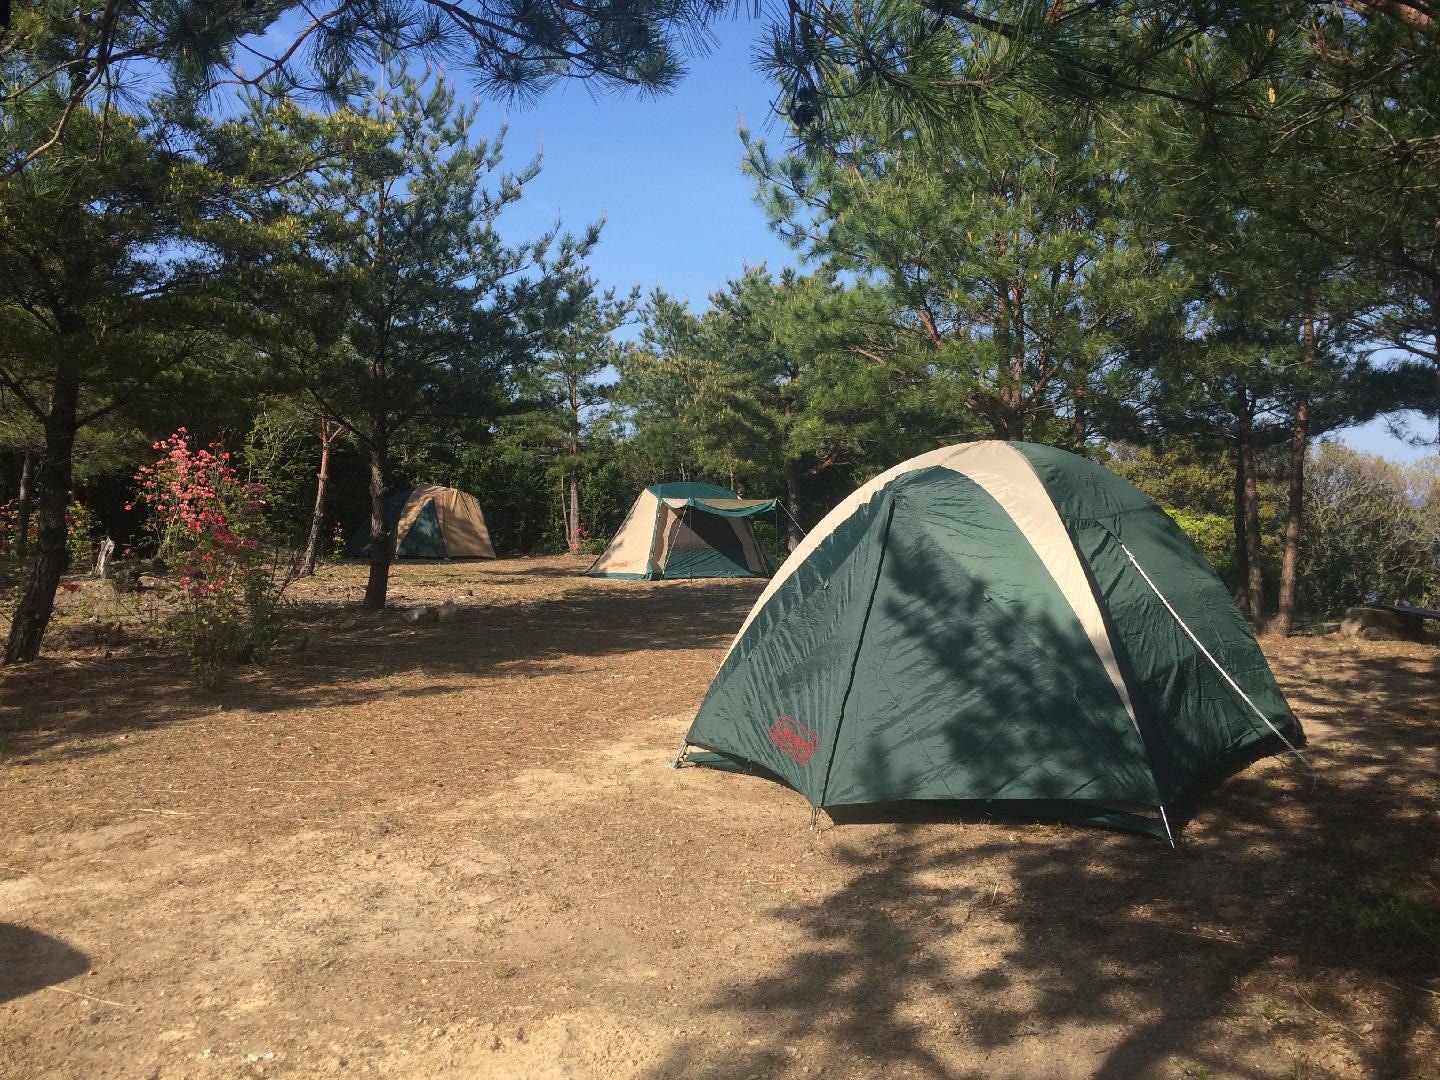 ・[Free Camp] Why not relax and forget about time in the great outdoors?